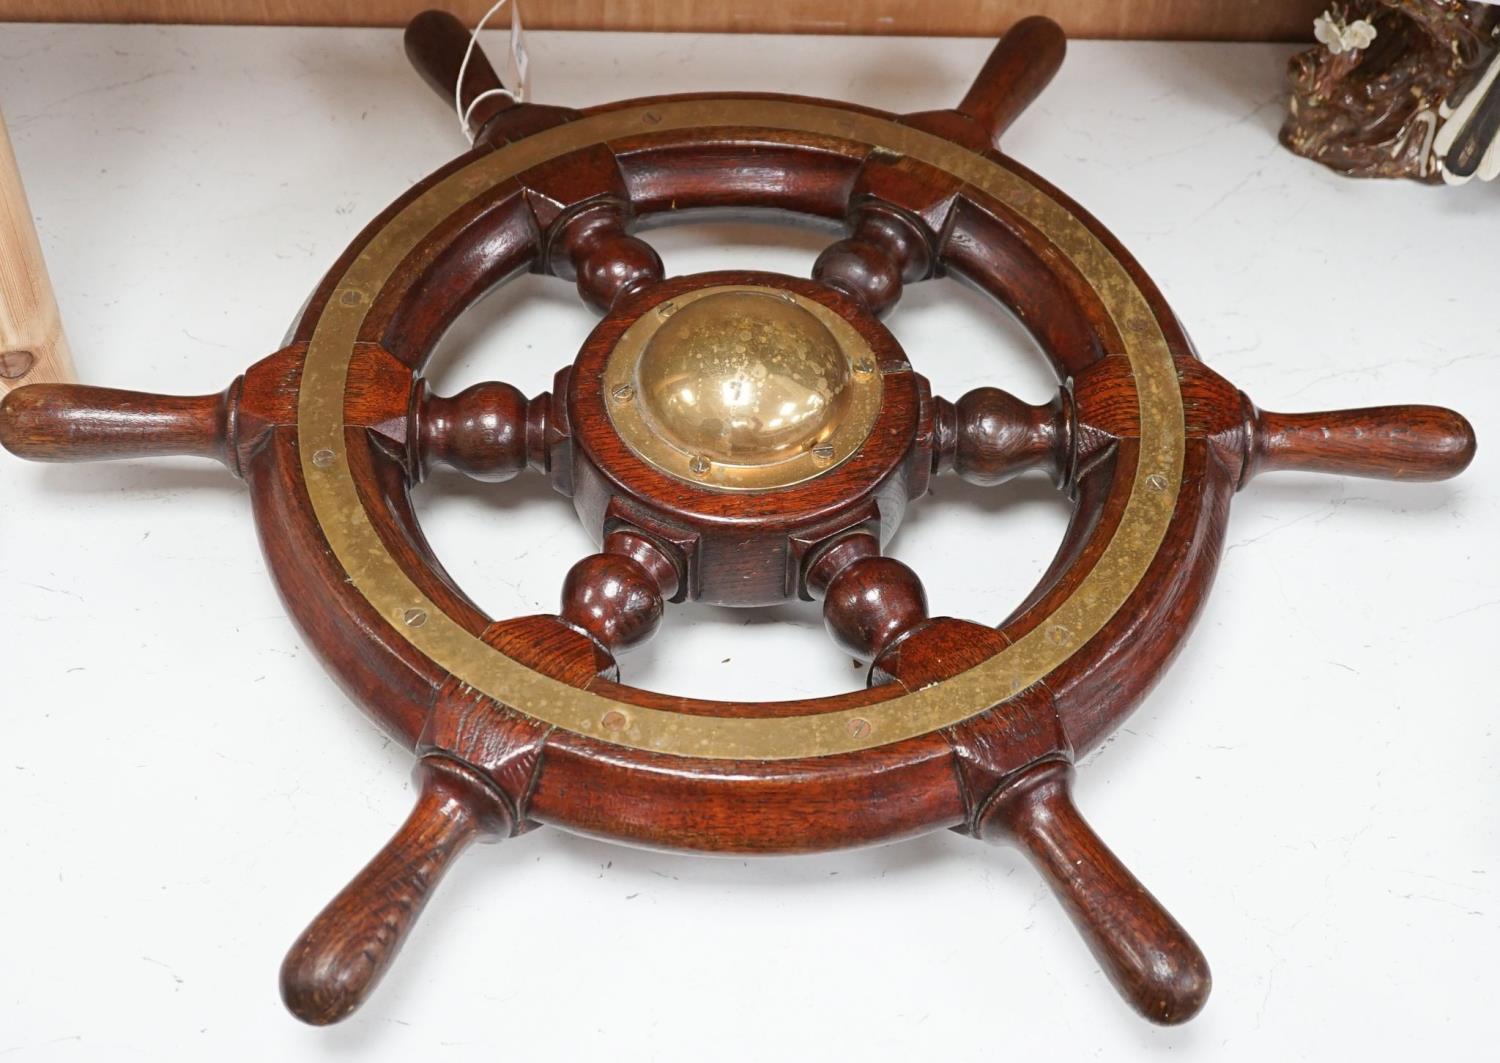 An early 20th century teak and brass mounted ship’s wheel 64cm